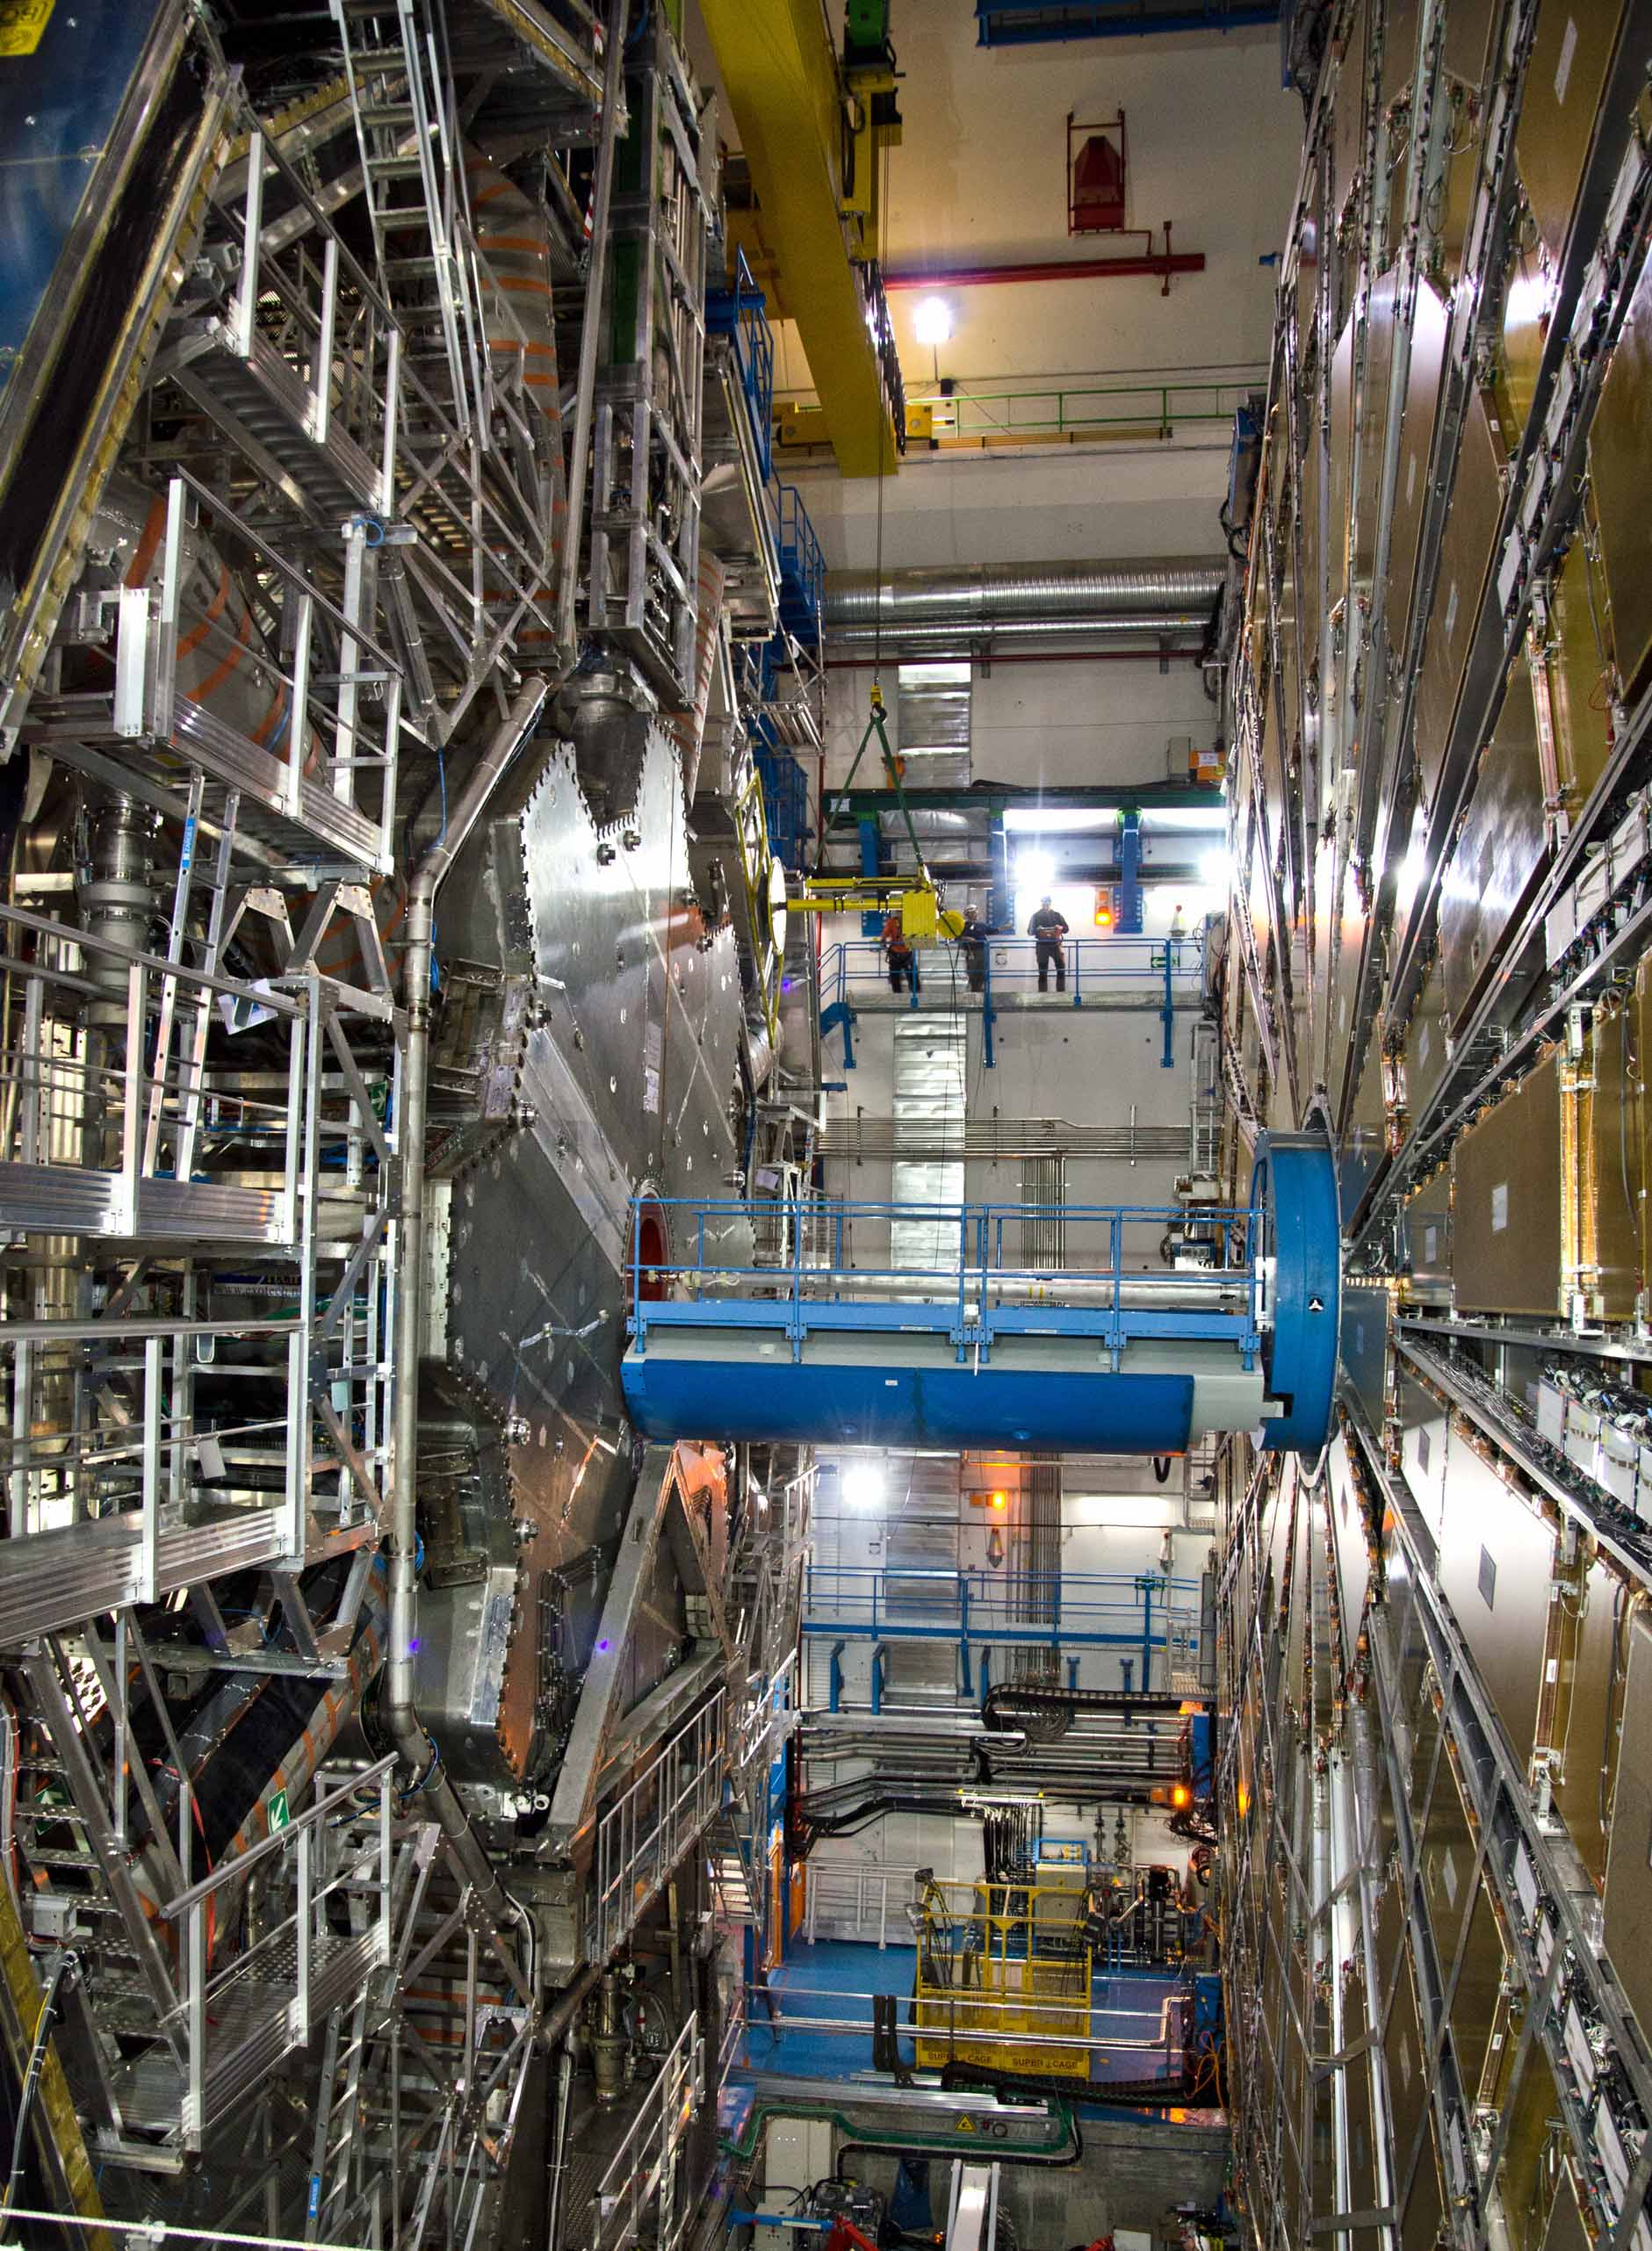 The ATLAS experiment at CERN's Large Hadron Collider